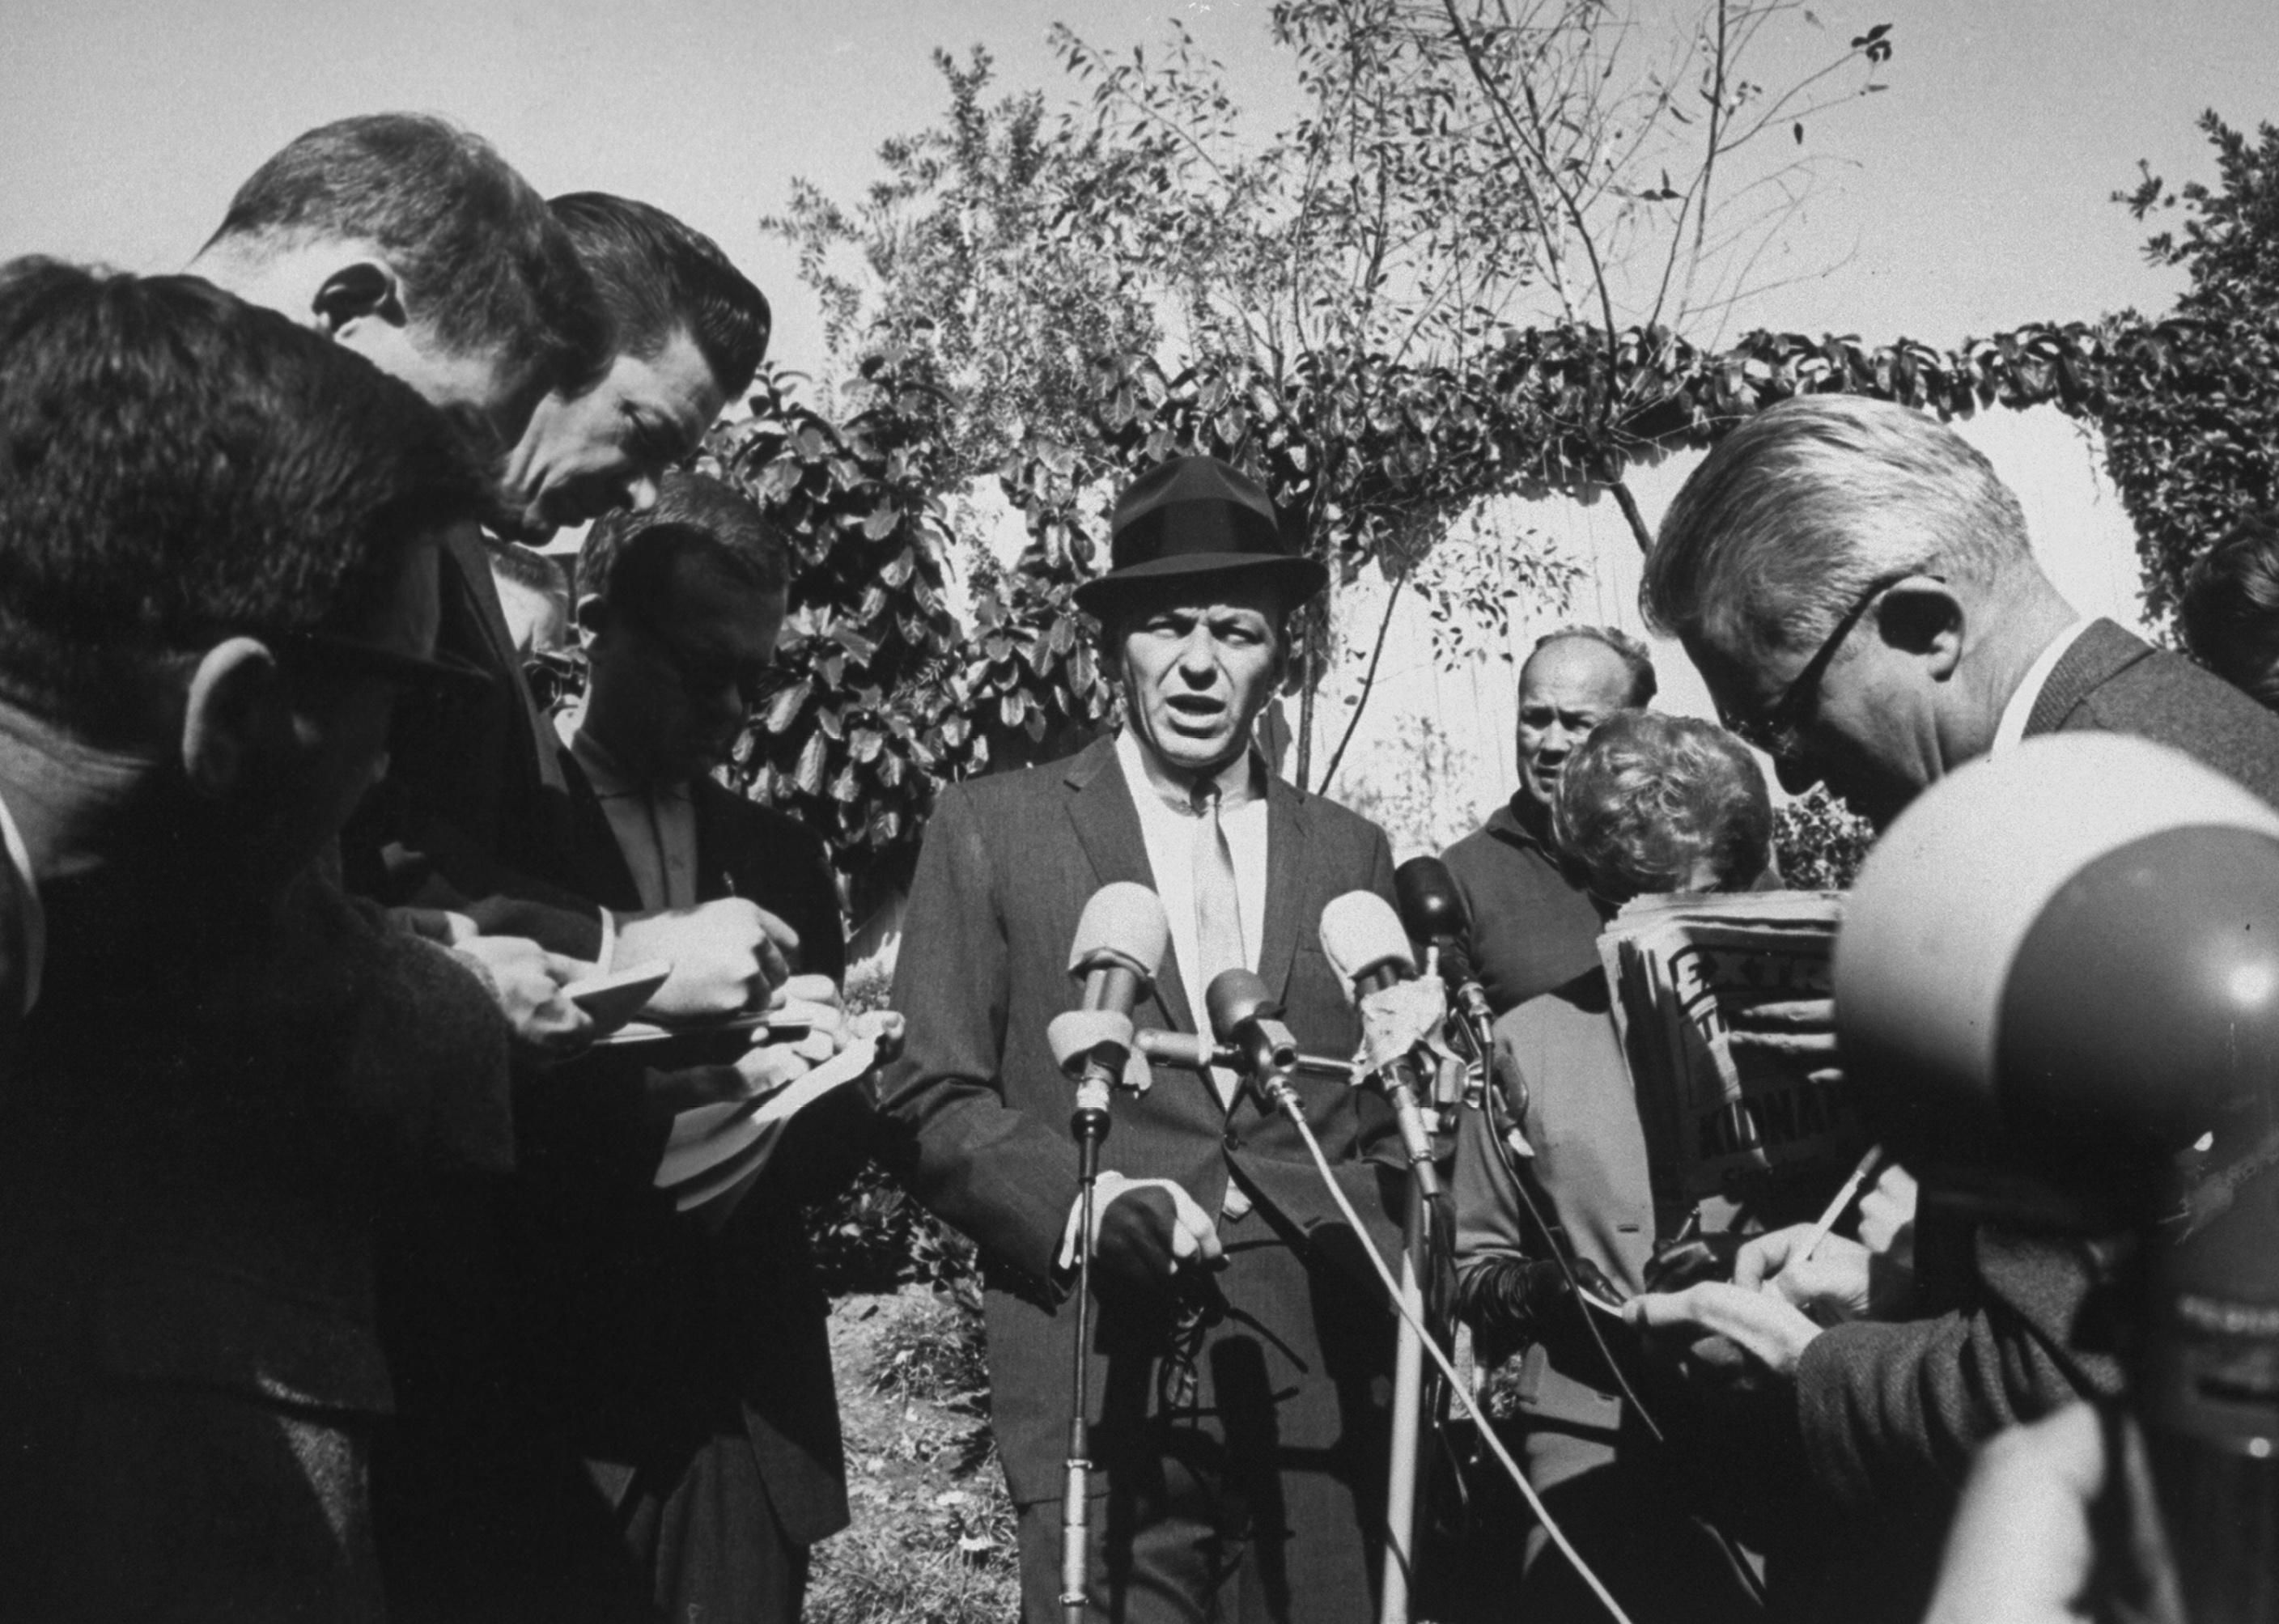 Frank Sinatra giving press conference on the kidnapping of his son Frank Jr.